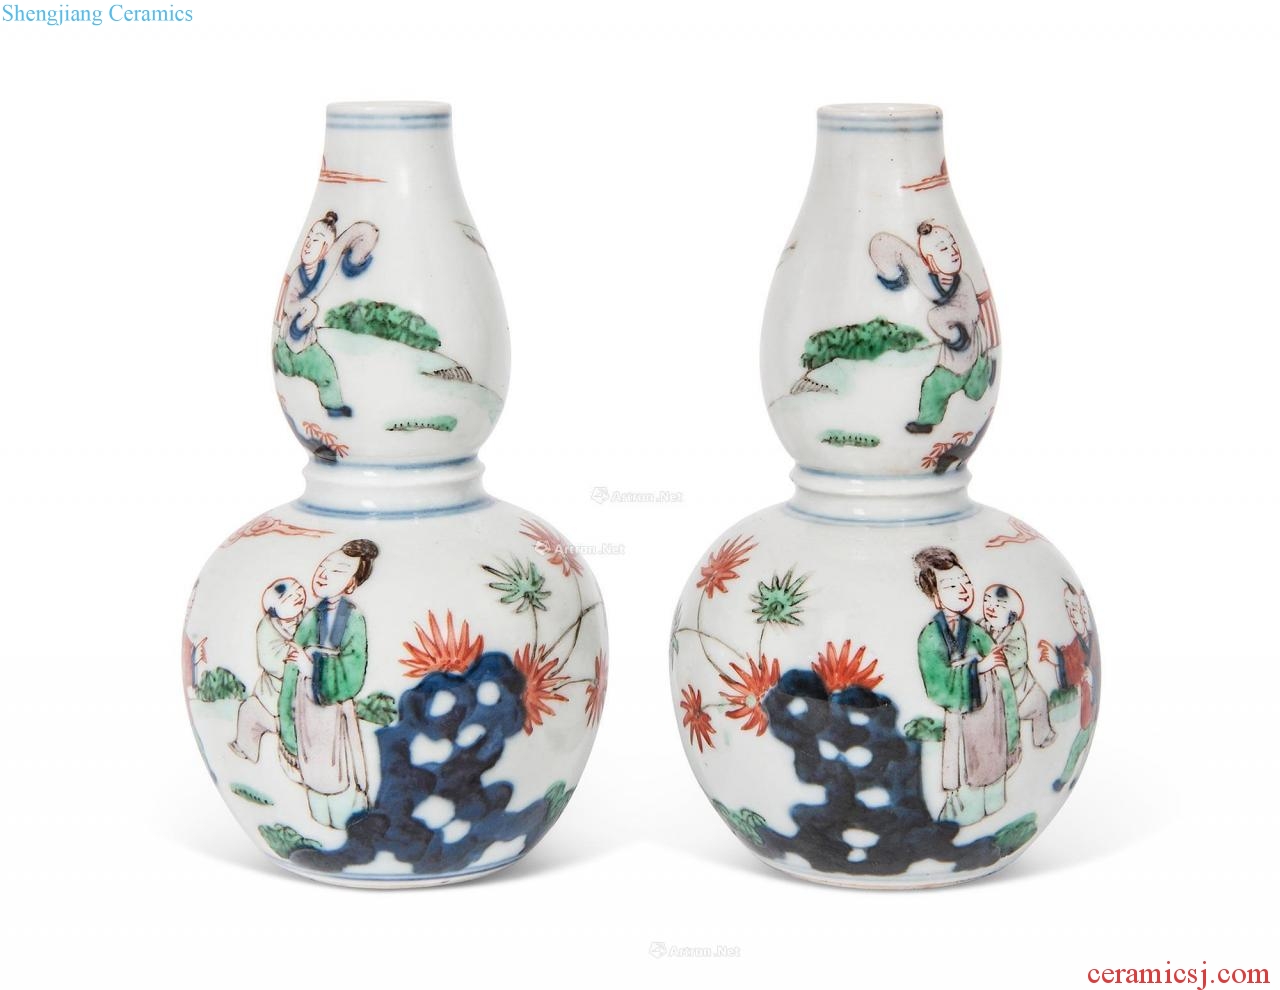 Qing 19th century colorful figure baby play gourd bottle (a)